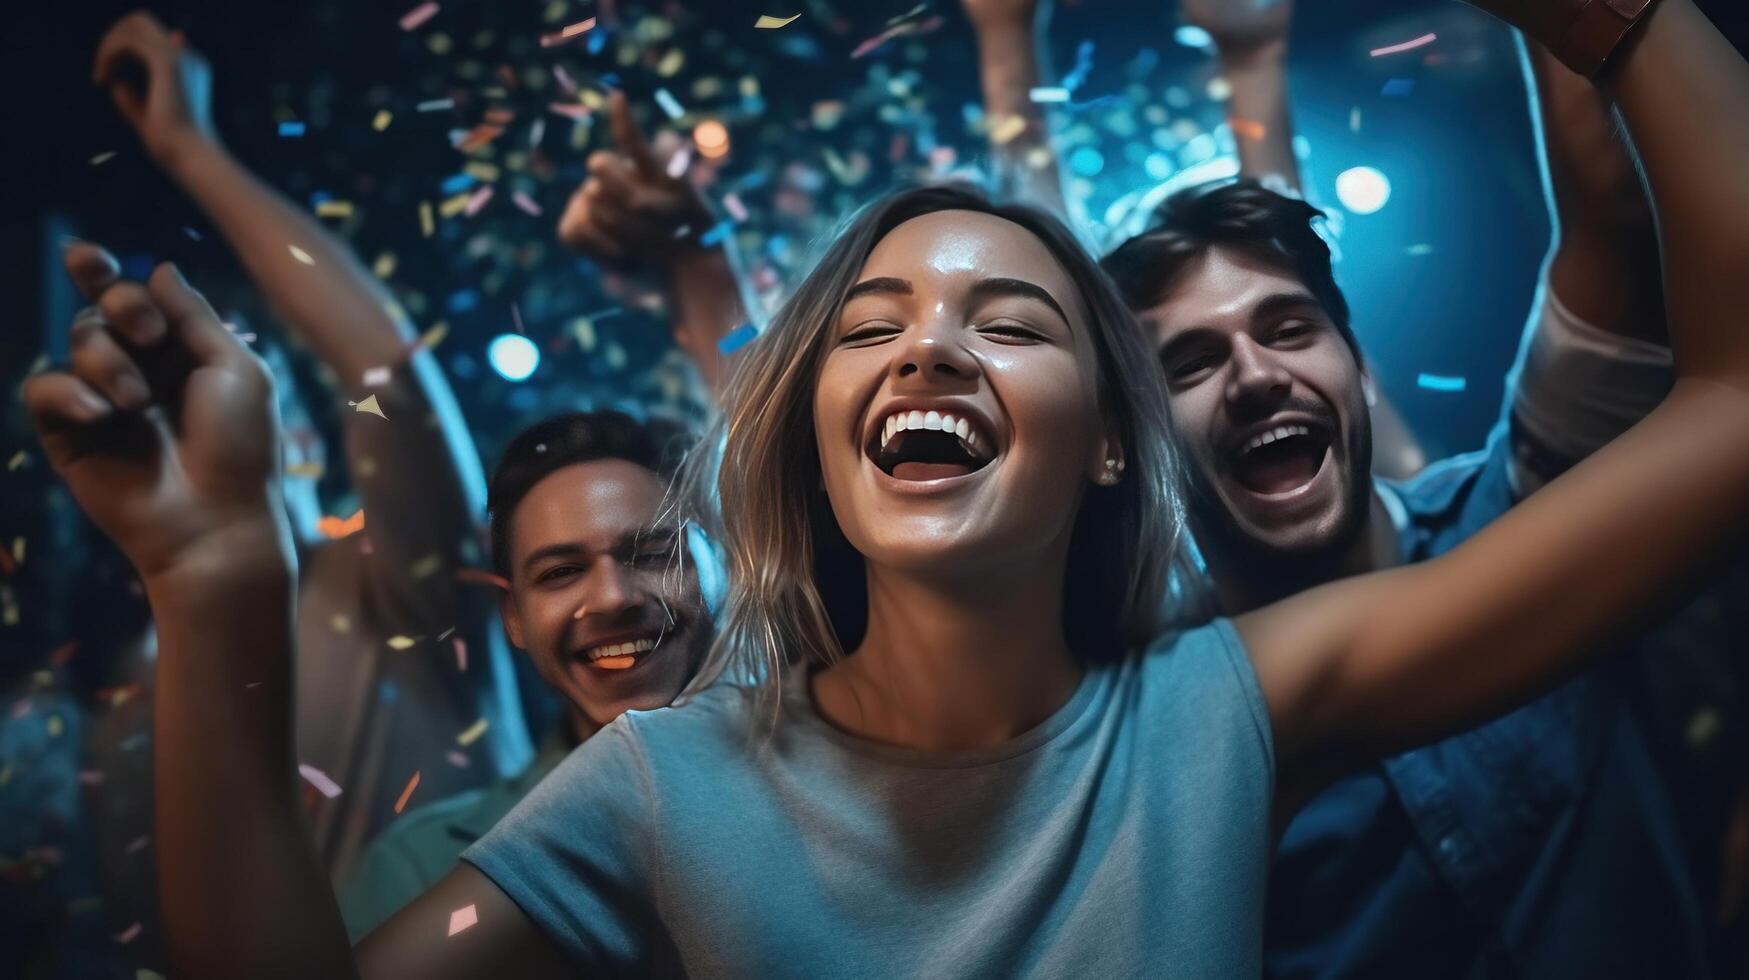 Happy Young people in night club. Illustration photo